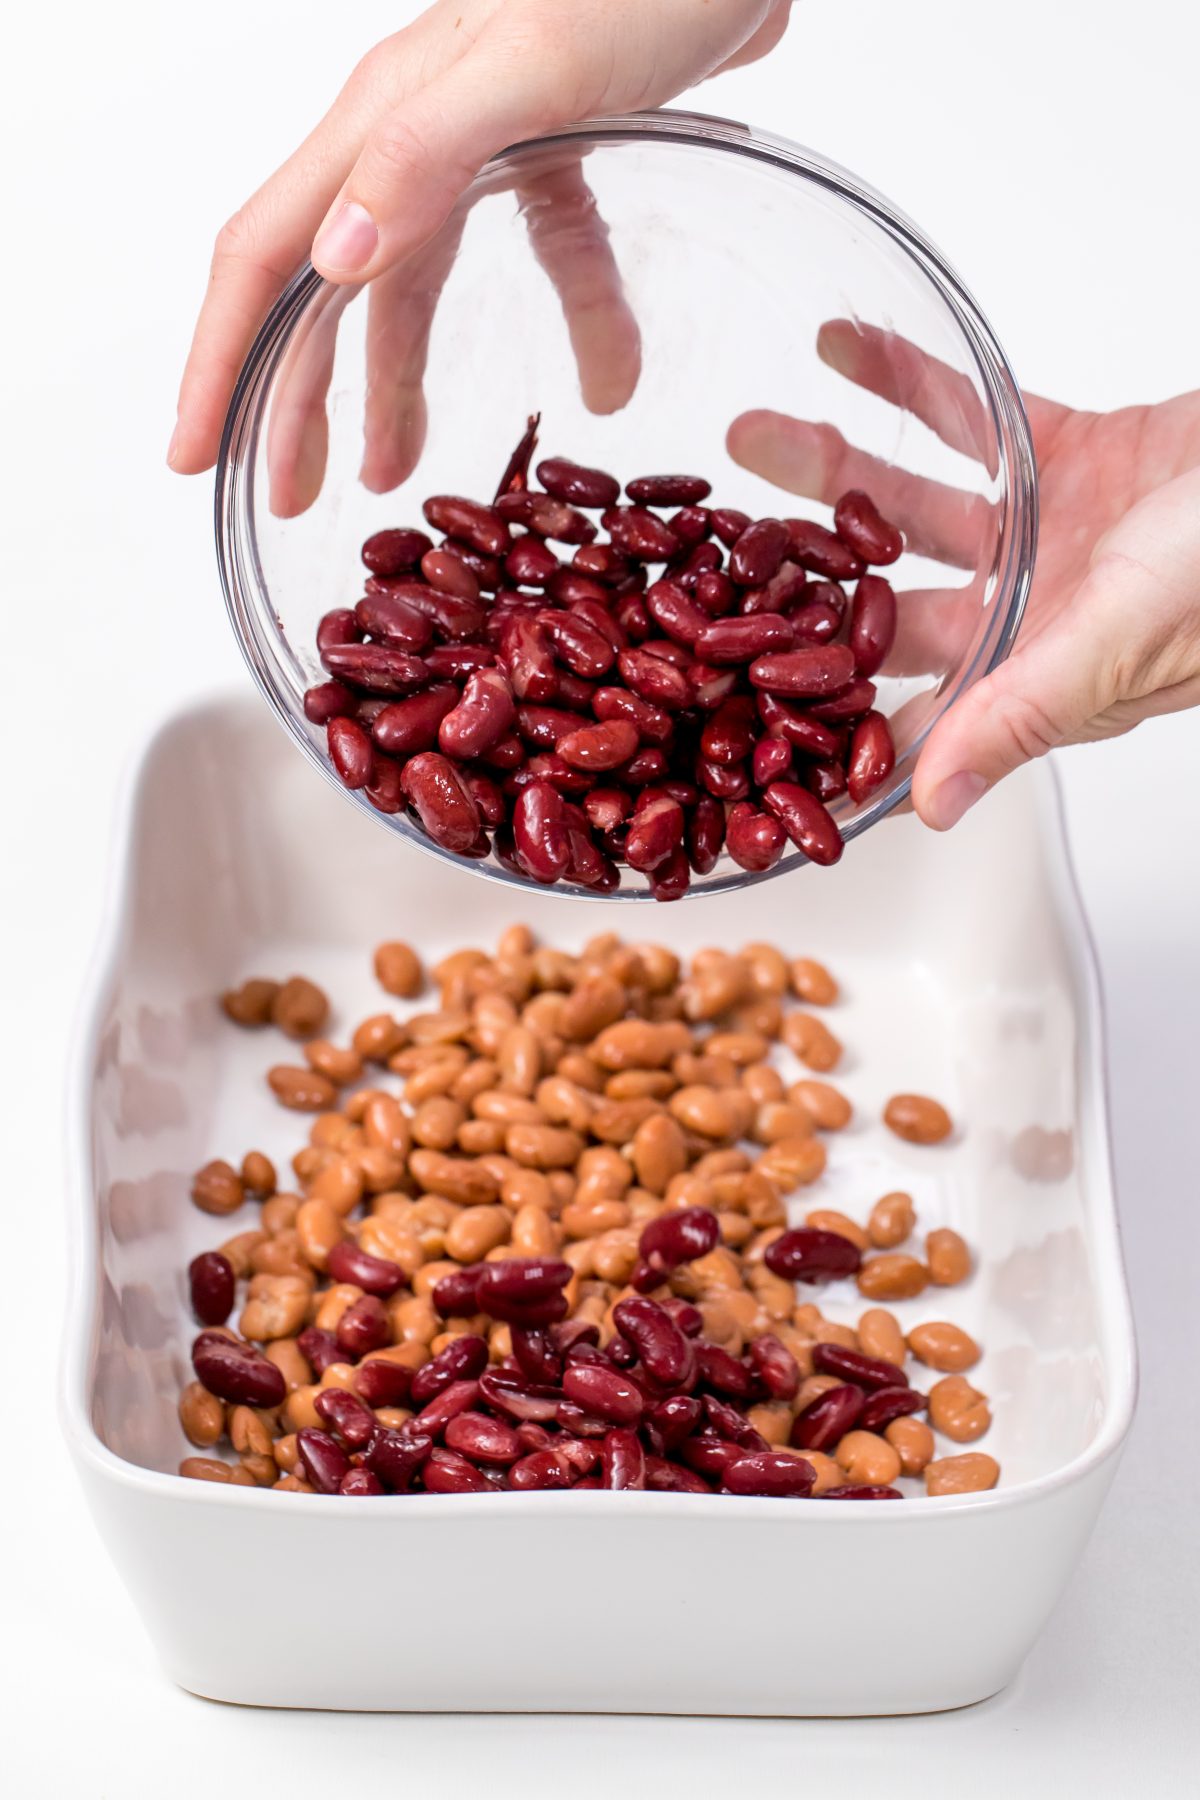 Add red kidney beans to bean dish